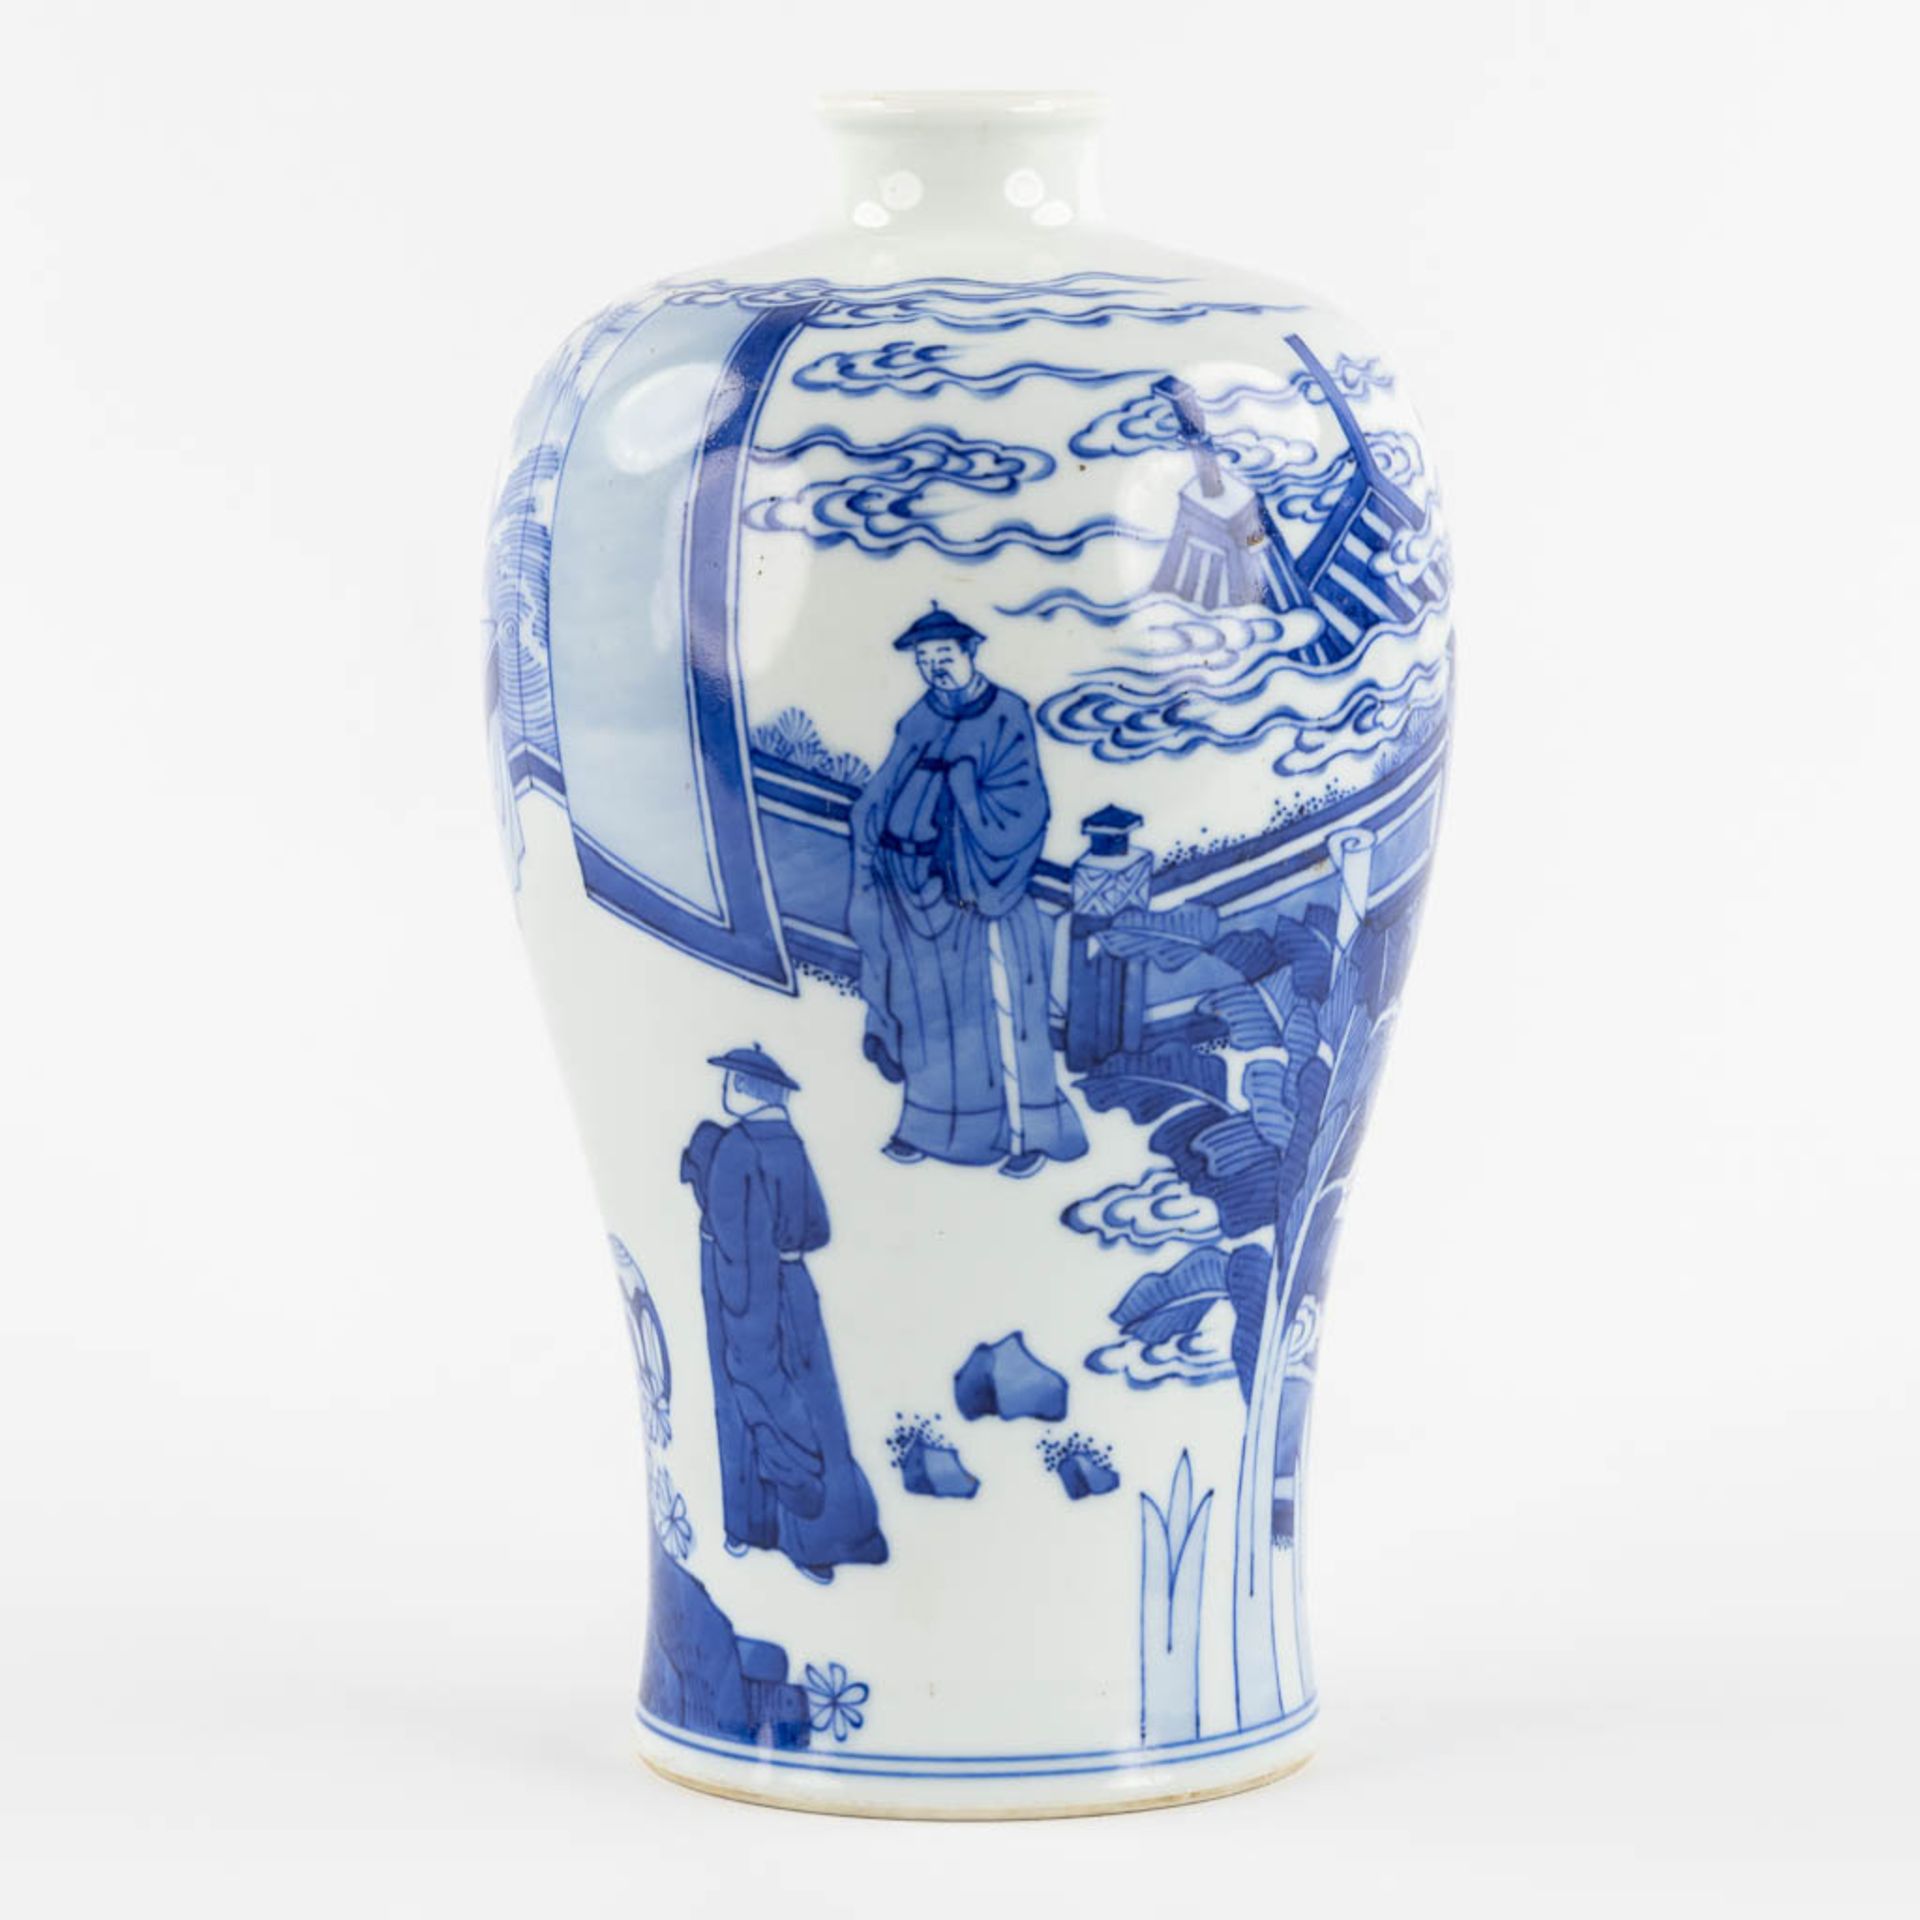 A Chinese 'Meiping' vase, blue-white decor. 20th C. (H:25 x D:15 cm)